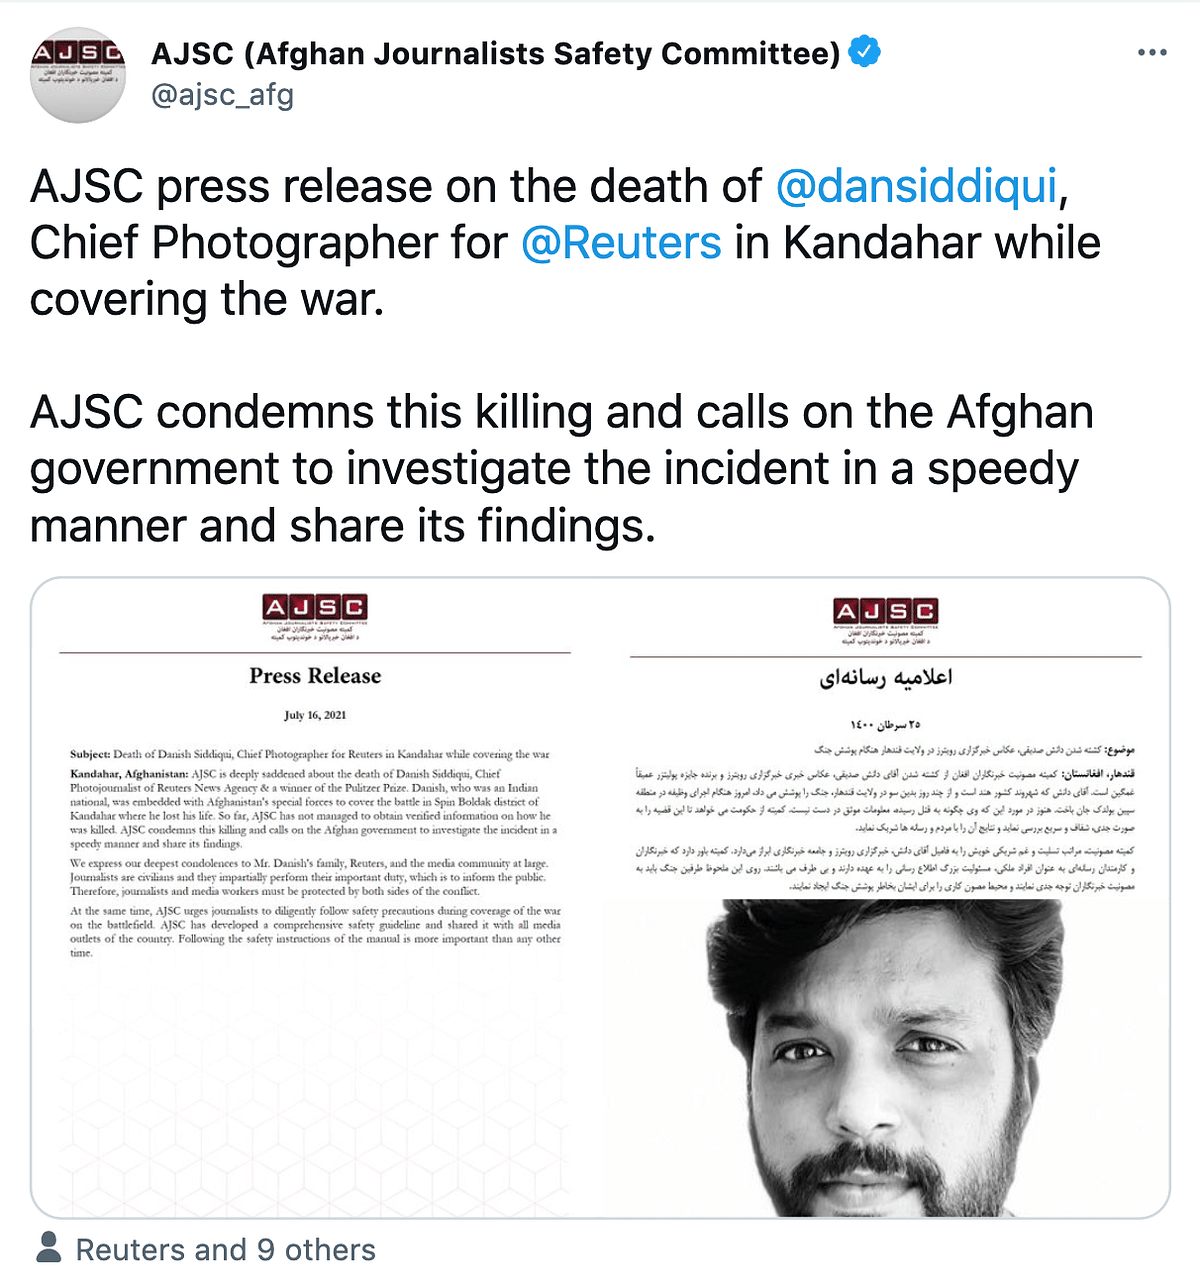 The United Nations said Danish Siddiqui's death was a painful reminder of dangers faced by the media in Afghanistan.